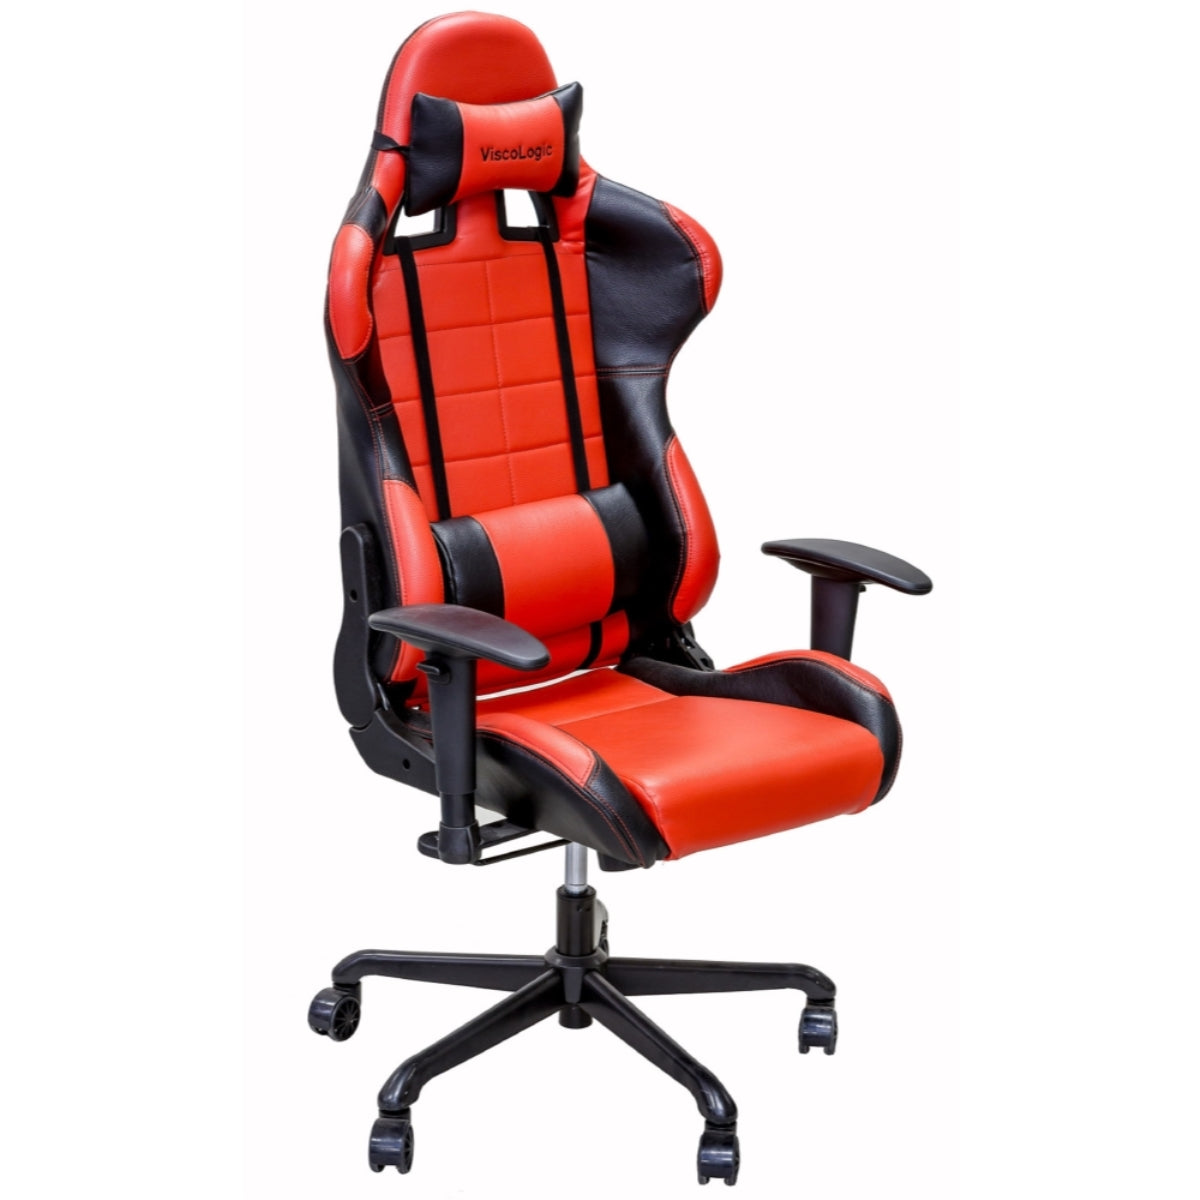 ViscoLogic  CAYENNE Ergonomic Metal Frame Gaming Racing Style Swivel Home Office Gaming Chair